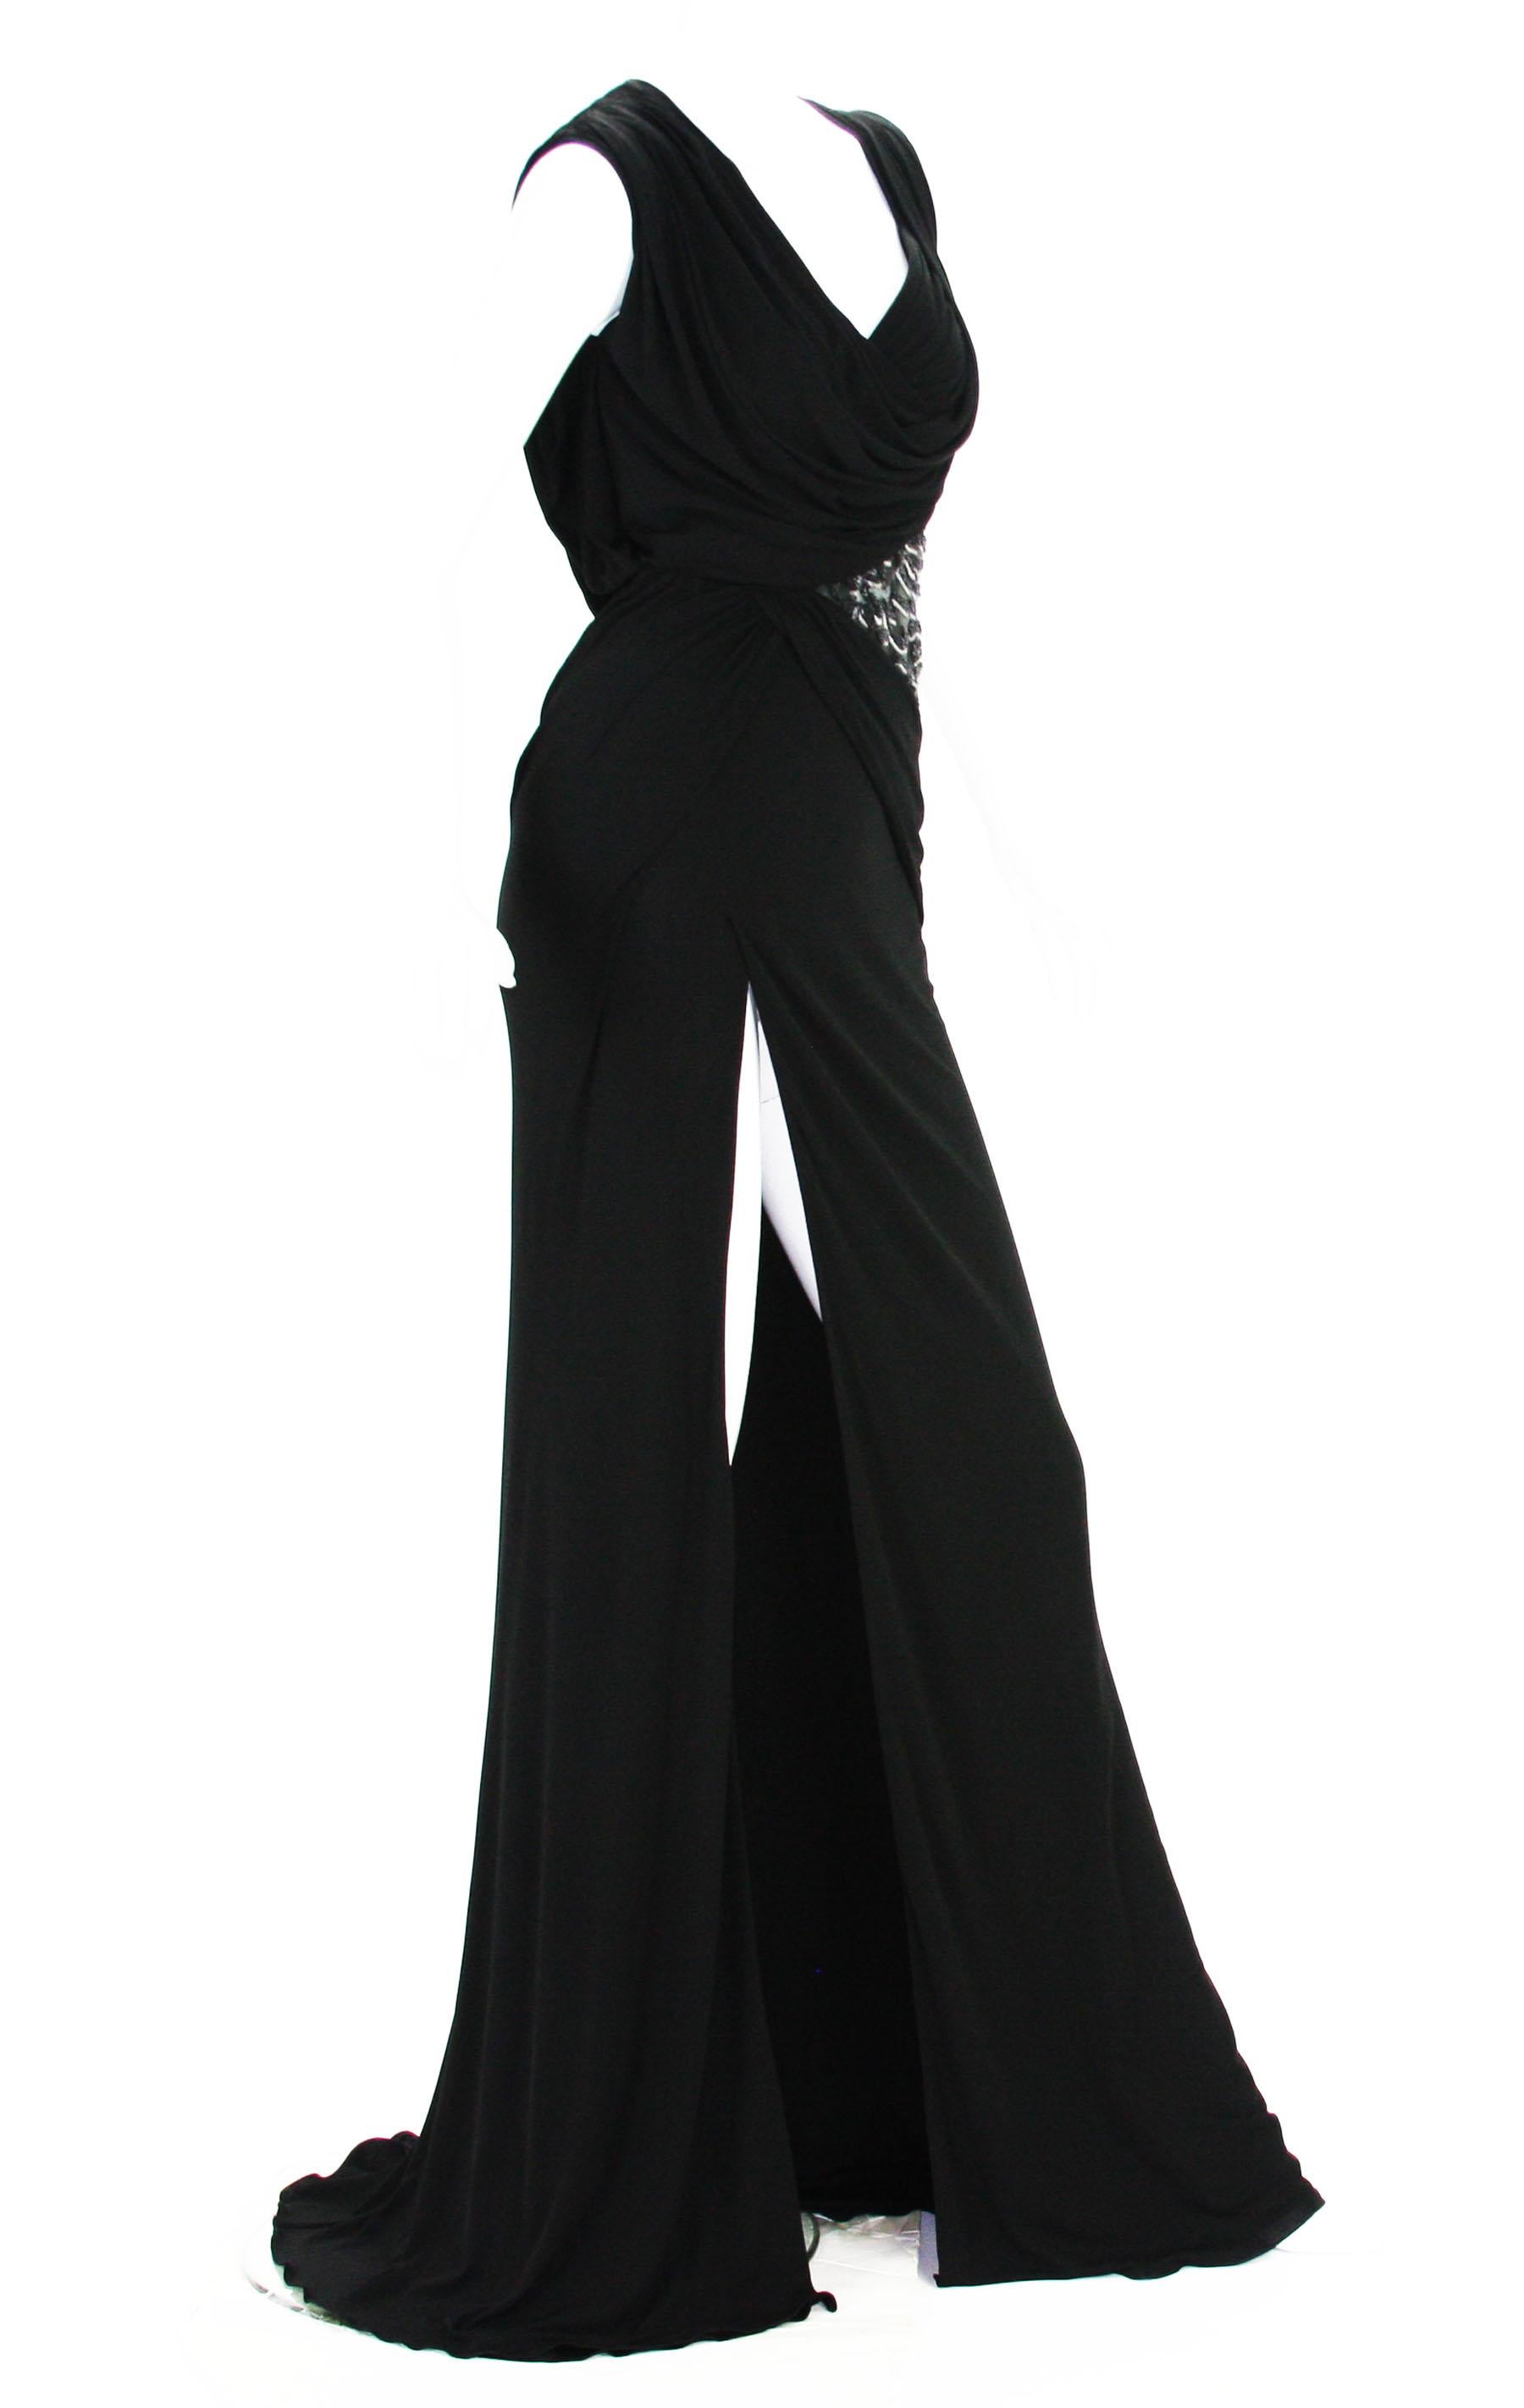 New Versace Black Jersey Long Dress Gown
Designer size 40 -  US 6
Black Jersey, High Side Slit, Build in Leotard Bottom Underlay, Side Zip Closure, Fully Lined in Same Jersey Fabric.
Leather, Beads and Sequins Embellishment Over the Tulle.
Made in